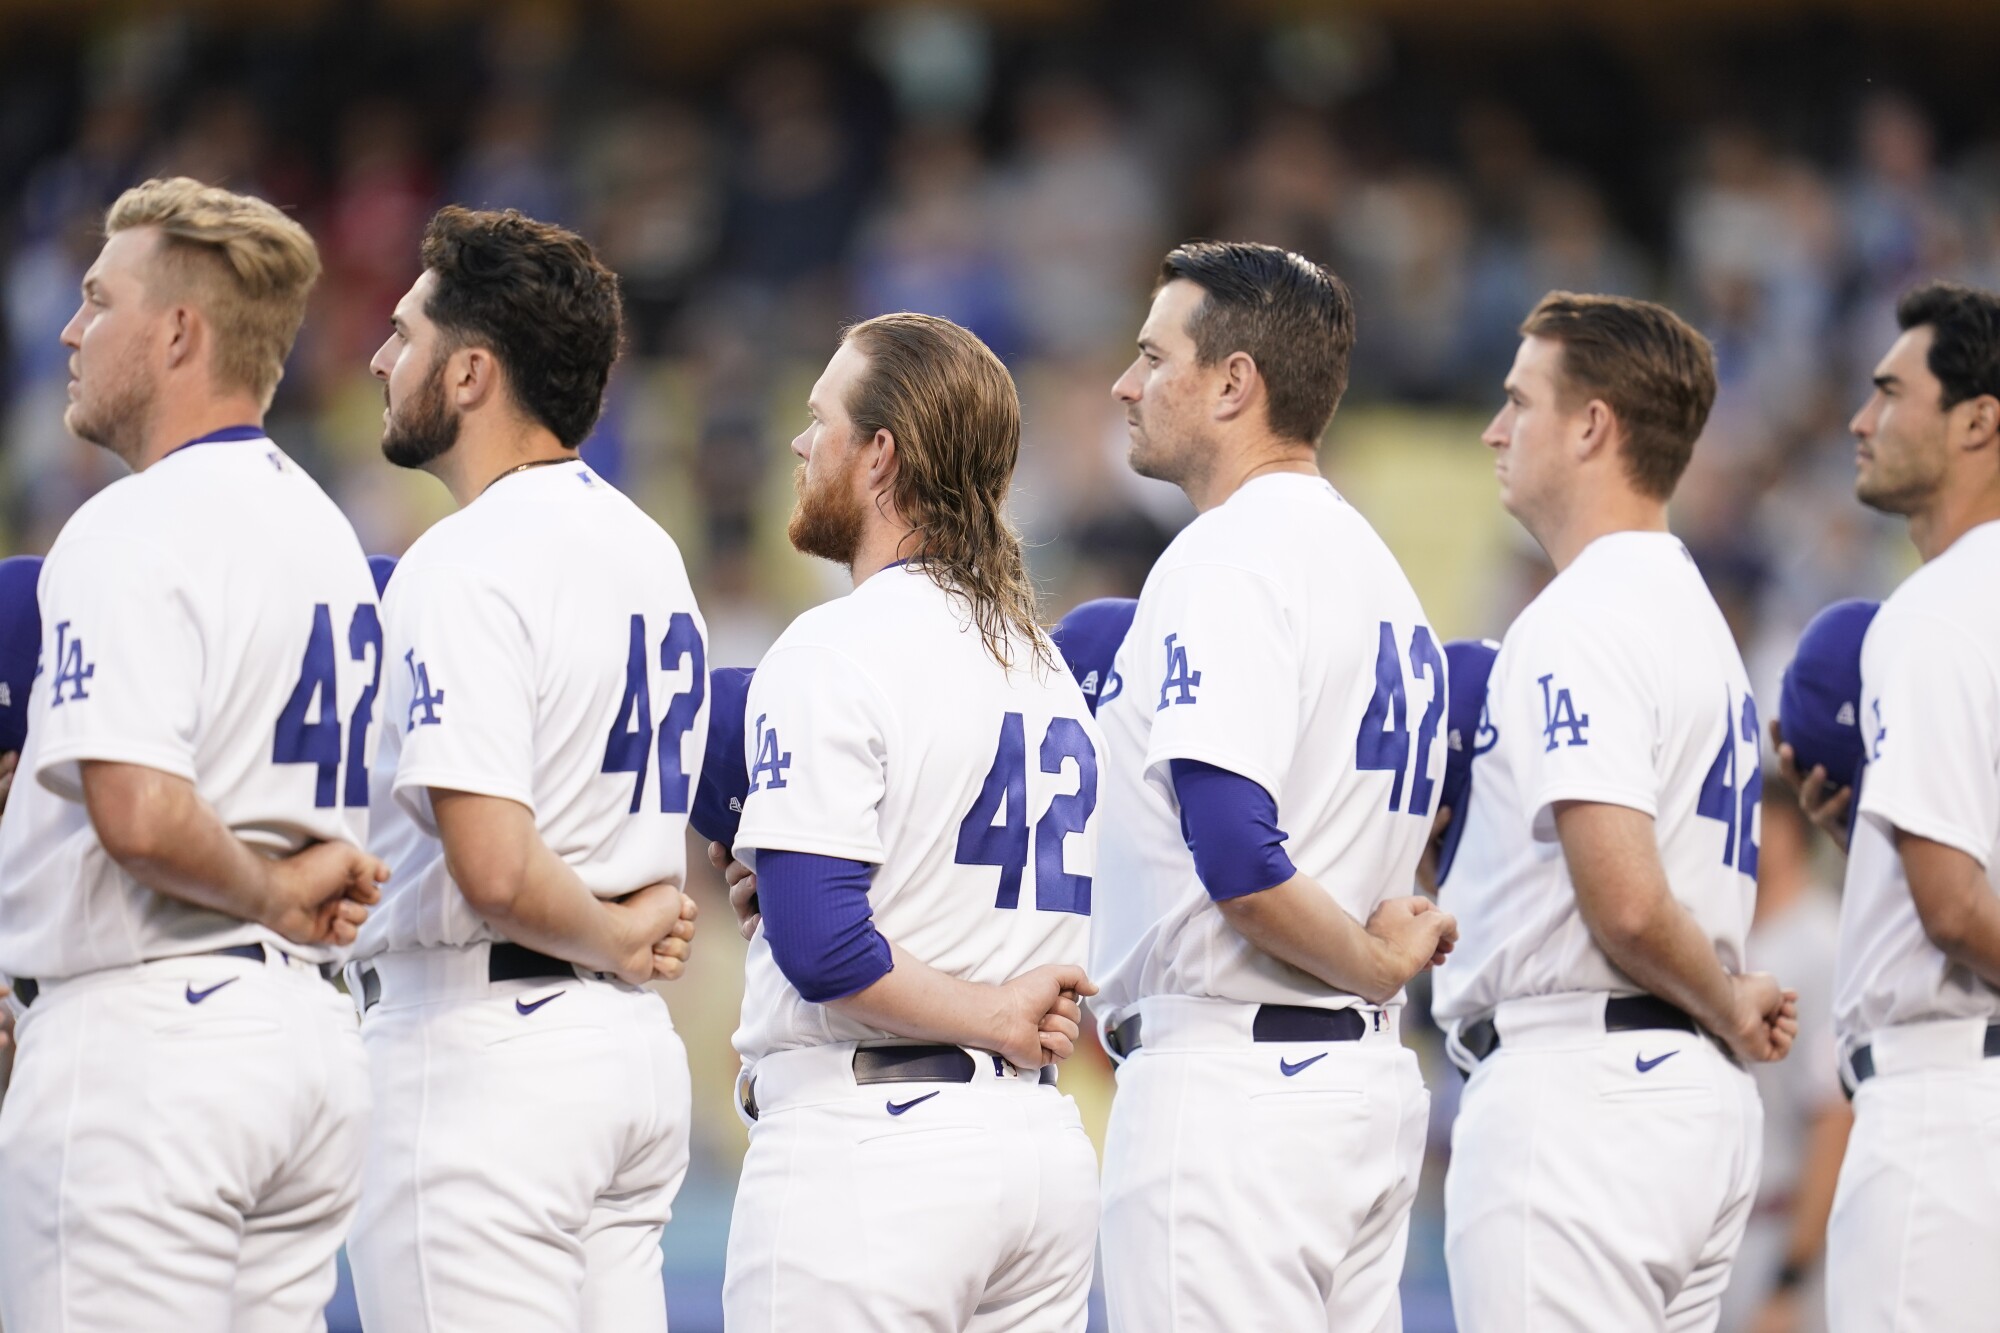 Dodgers players wear No. 42, in honor of Jackie Robinson, while listening to the singing of the national anthem.